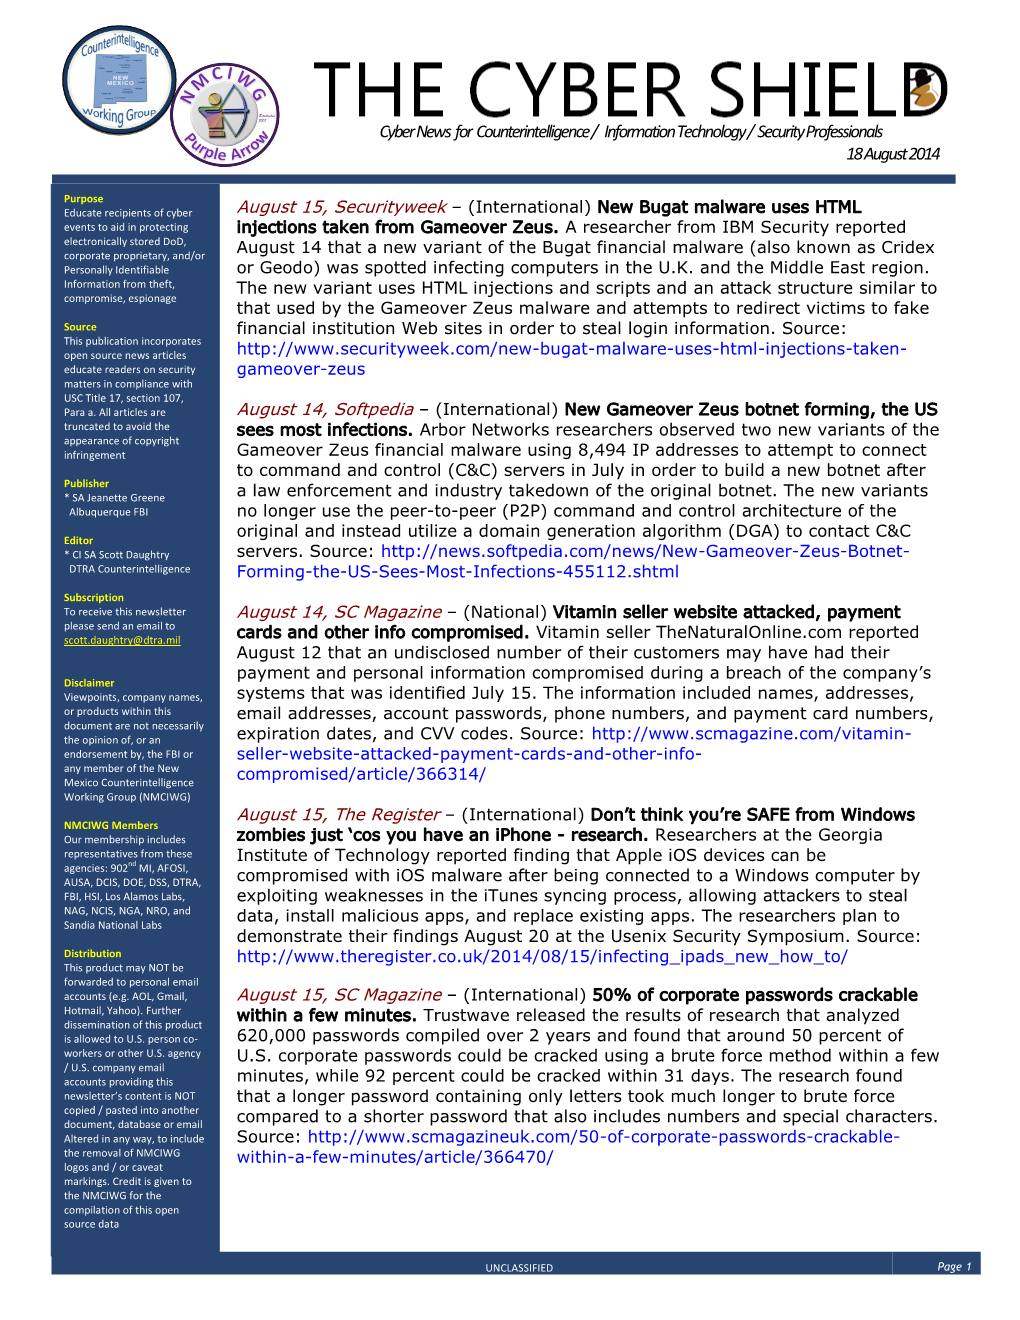 Cyber News for Counterintelligence / Information Technology / Security Professionals 18 August 2014